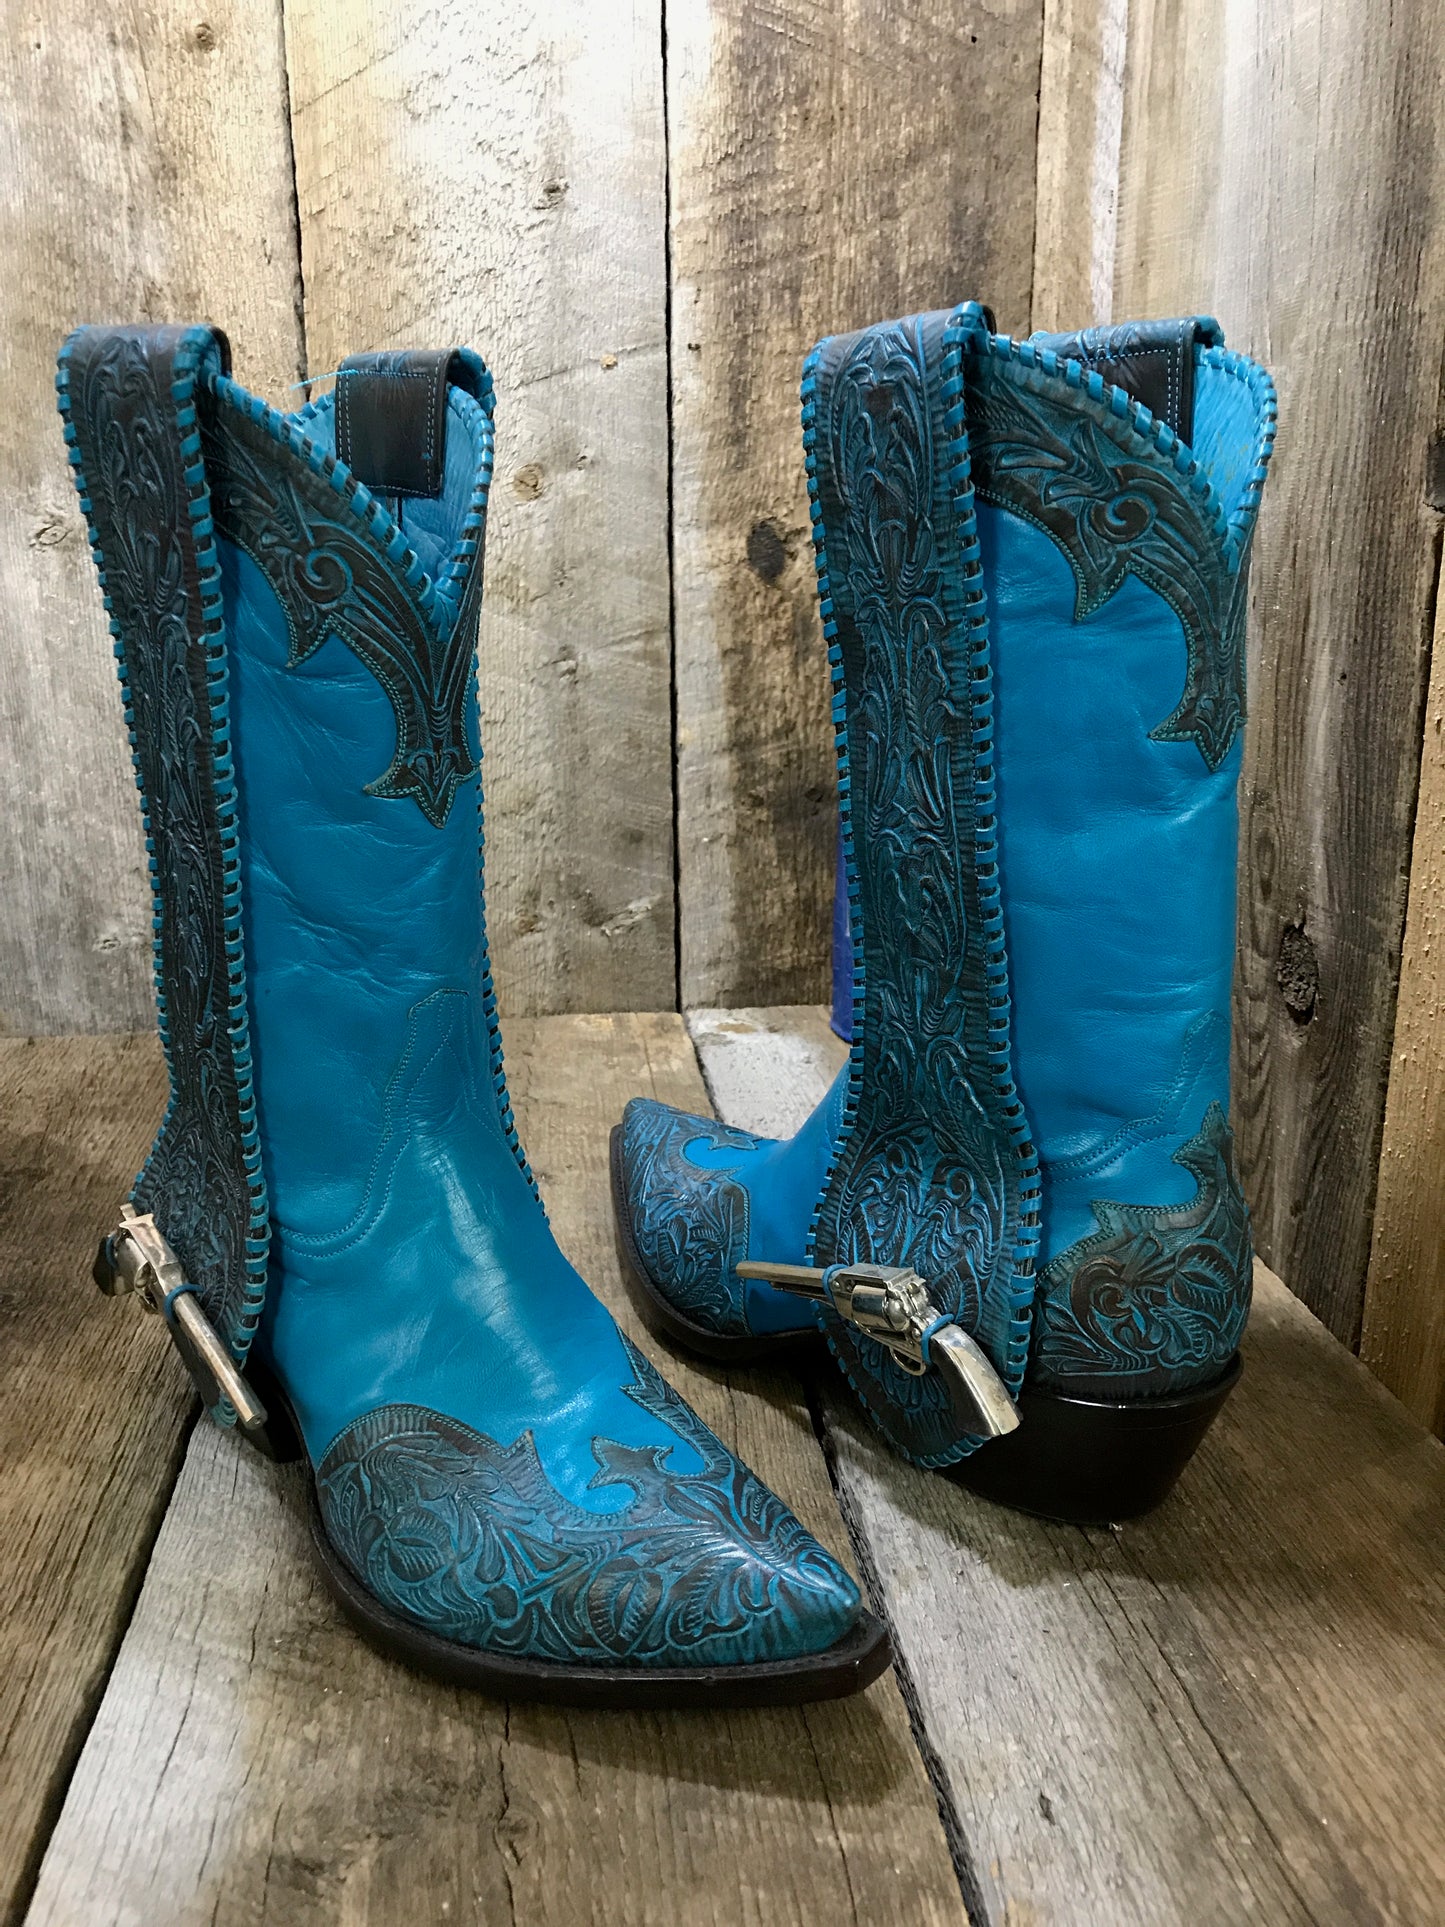 "Pistol Packing Momma" Blue Turq Tres Outlaws Women's Classic Boot 1830*